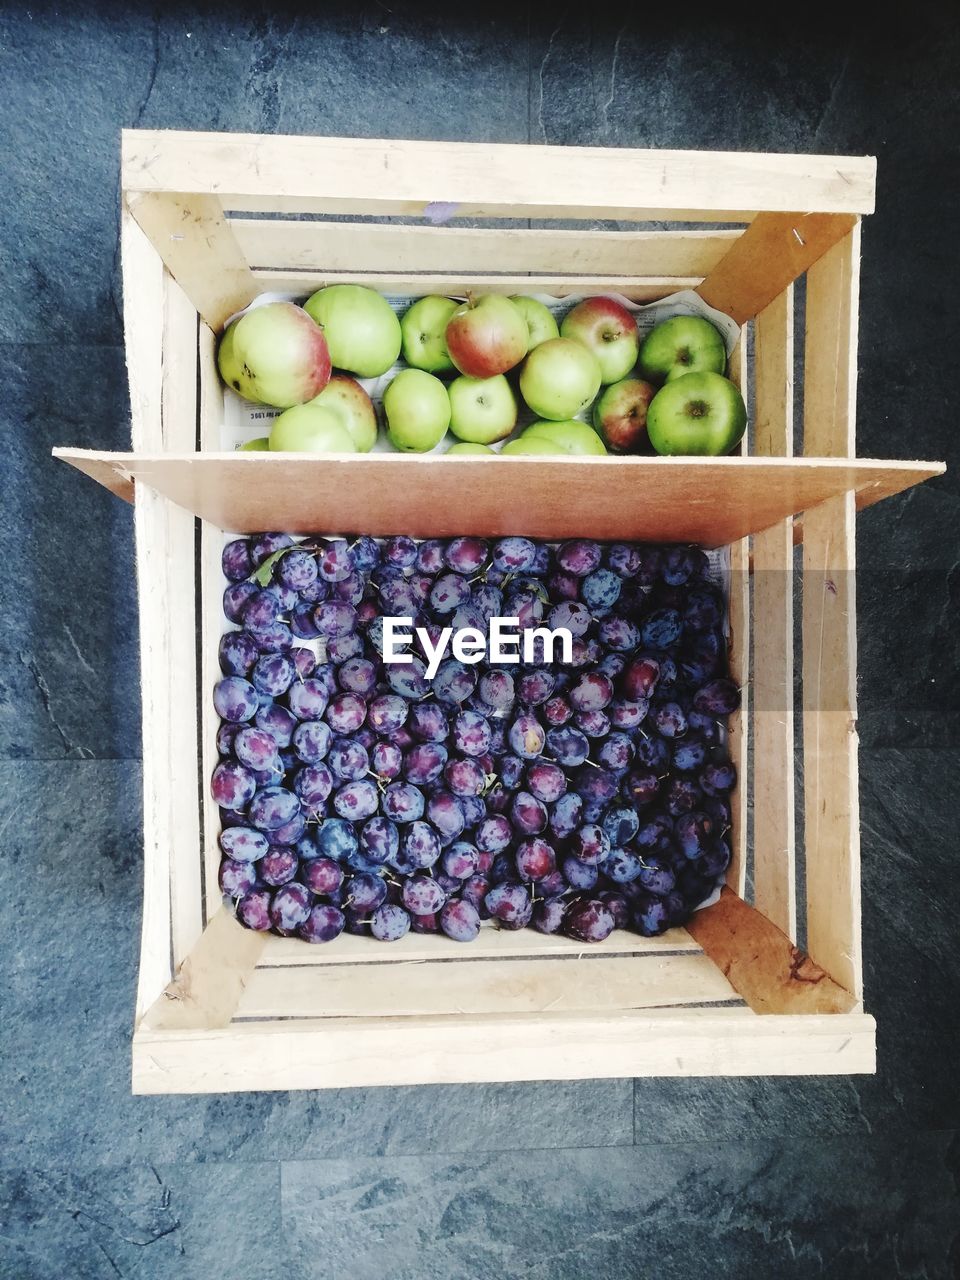 HIGH ANGLE VIEW OF GRAPES IN CONTAINER ON TABLE